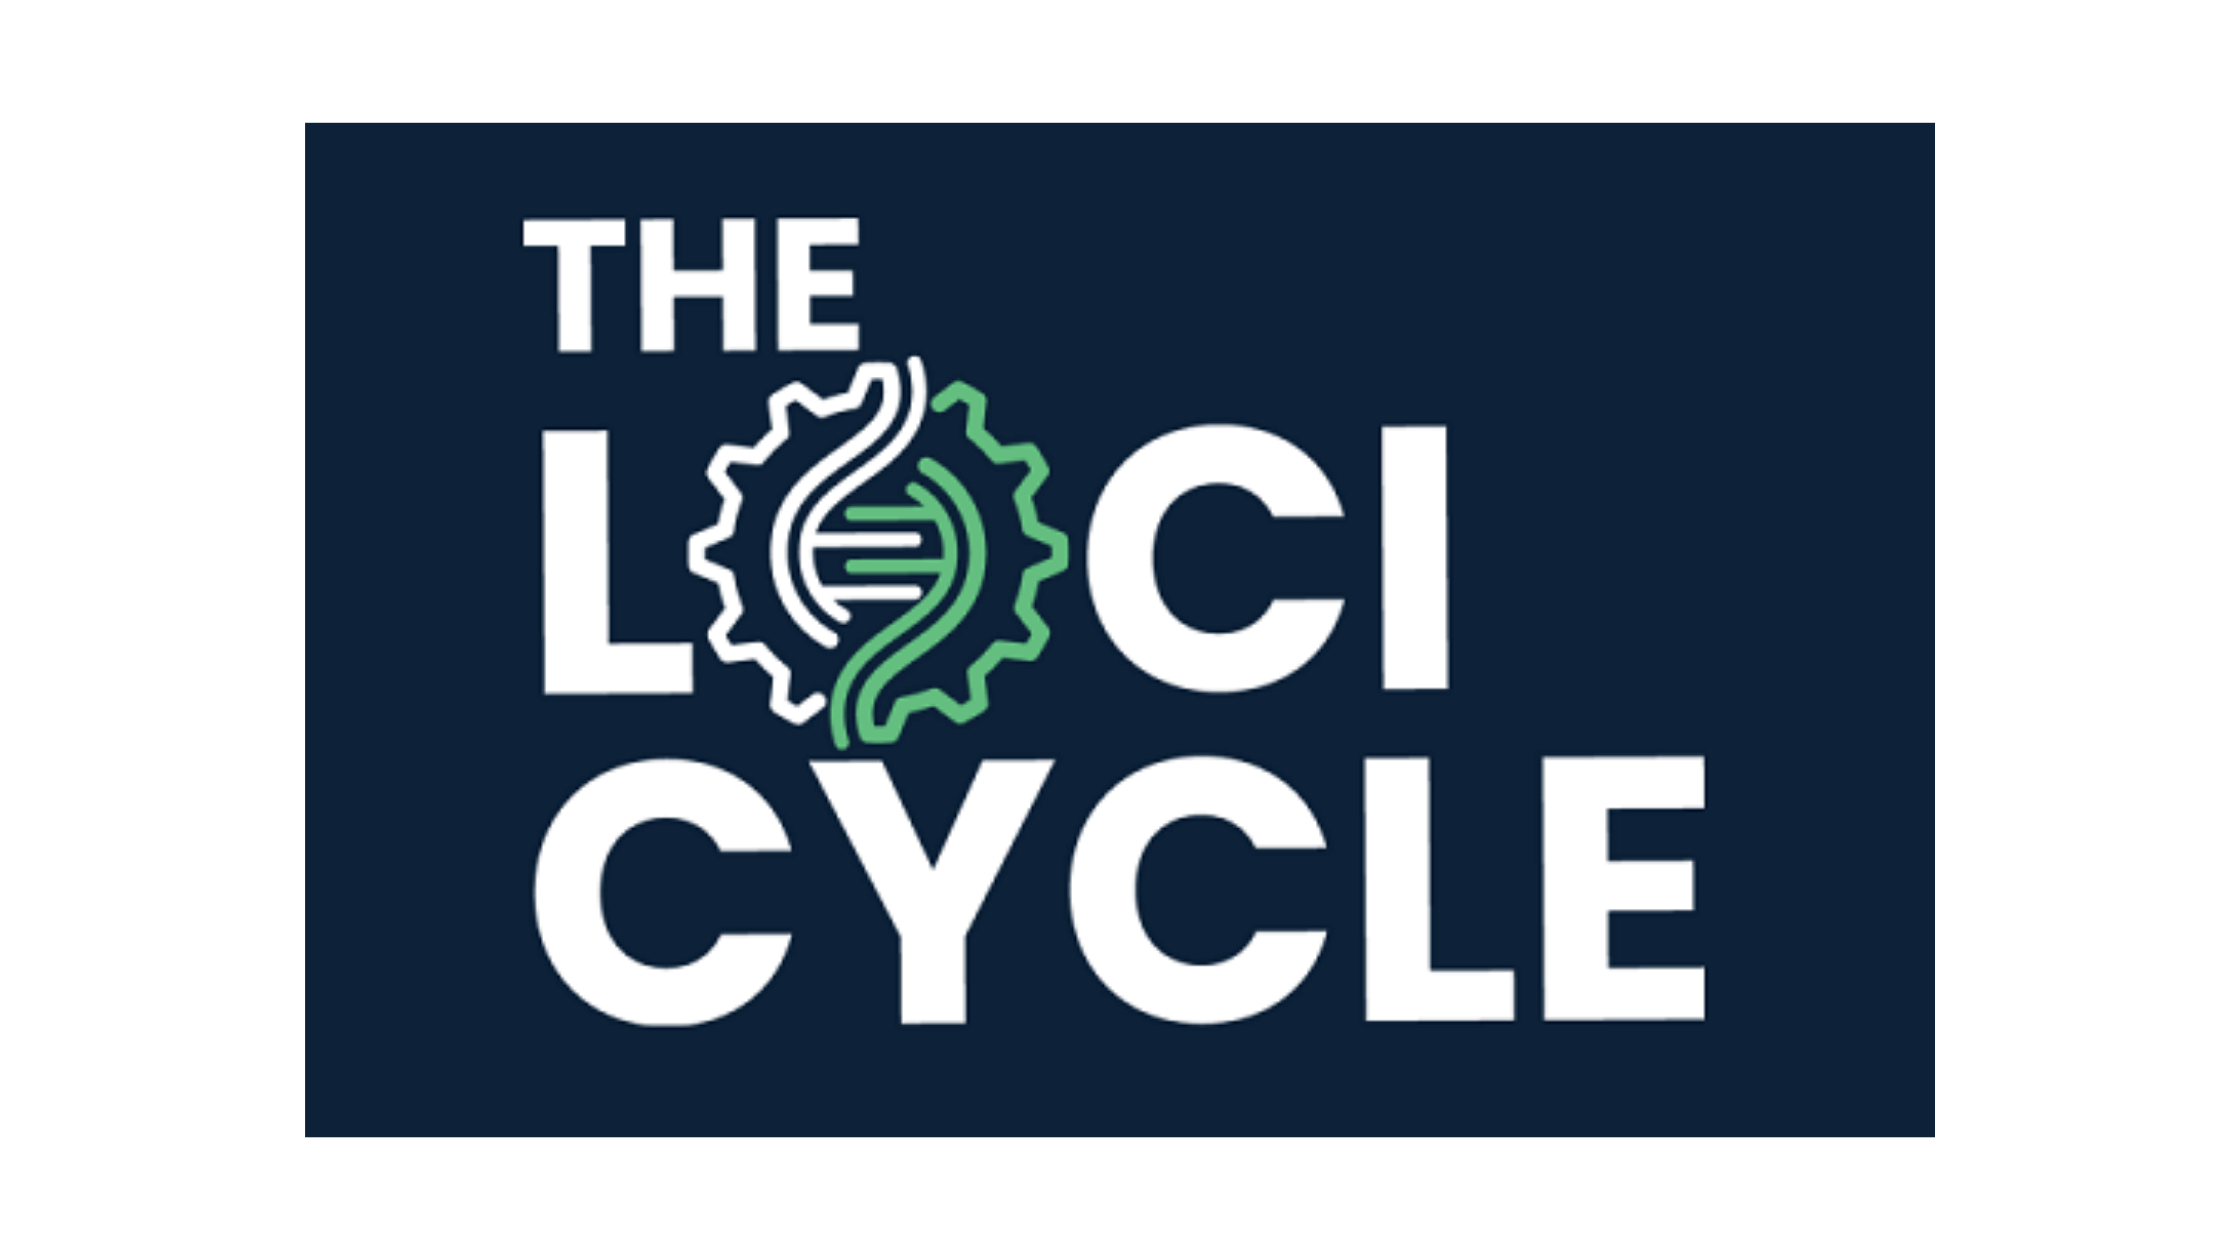 The Loci Cycle Reviews